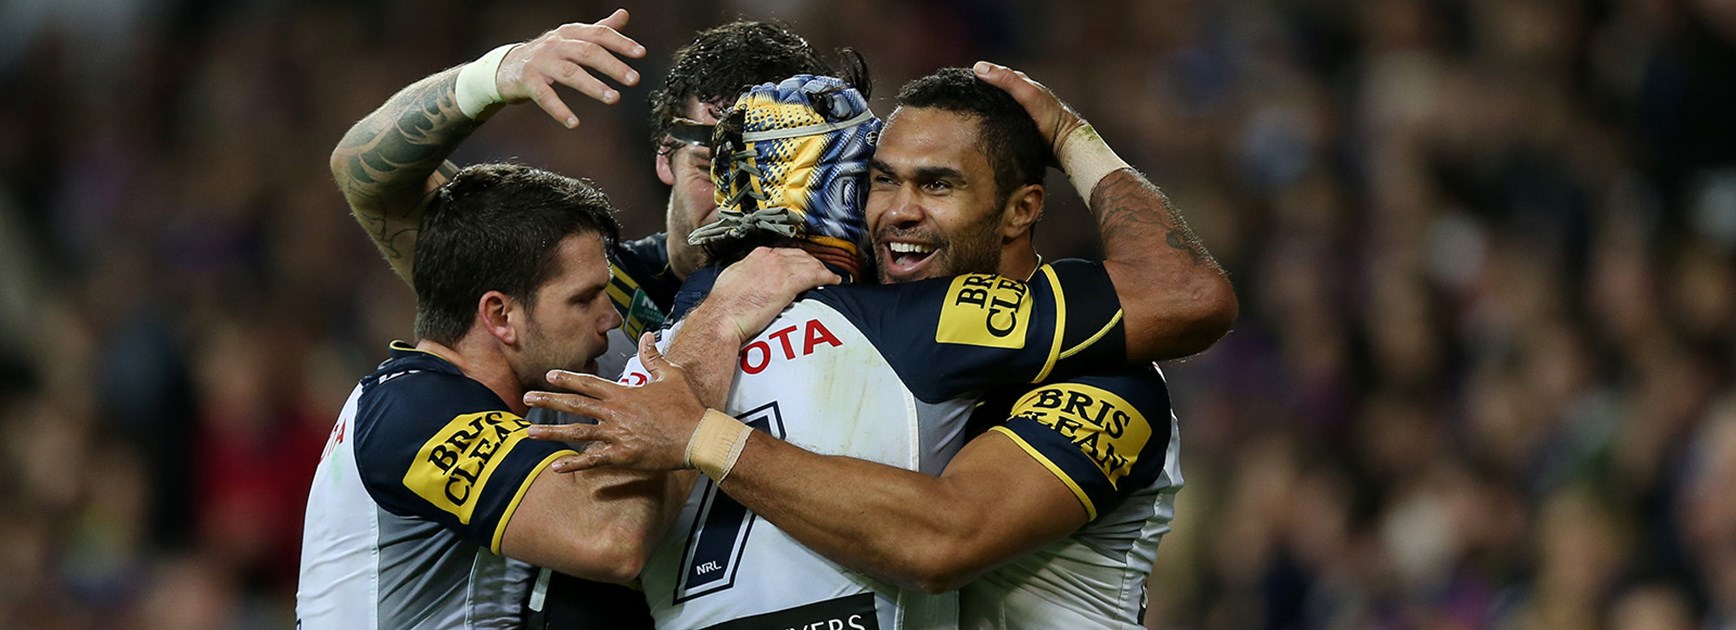 The Cowboys celebrate in their Preliminary Final with the Melbourne Storm at AAMI Park.